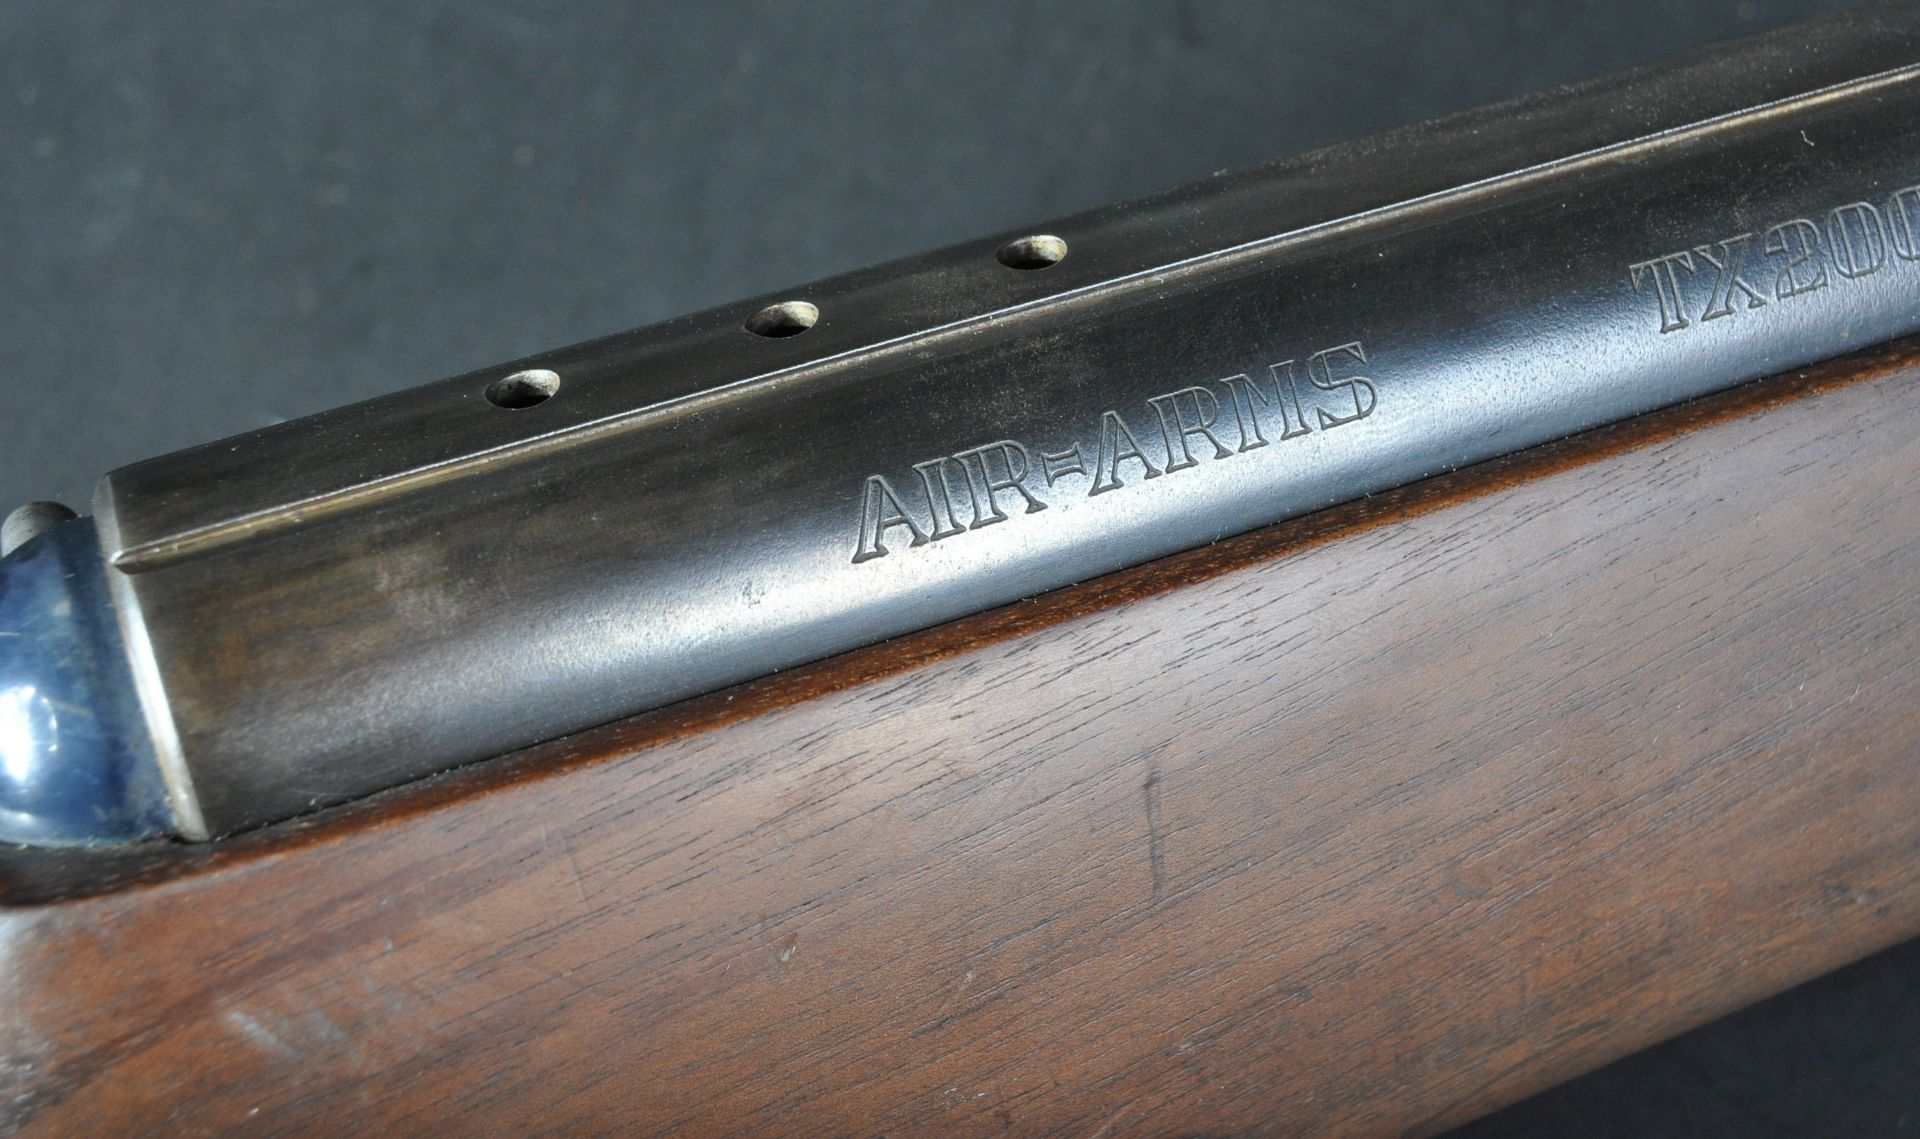 AIR-ARMS TX200 .22 CALIBRE UNDER-ARM AIR RIFLE WITH CASE - Image 6 of 9